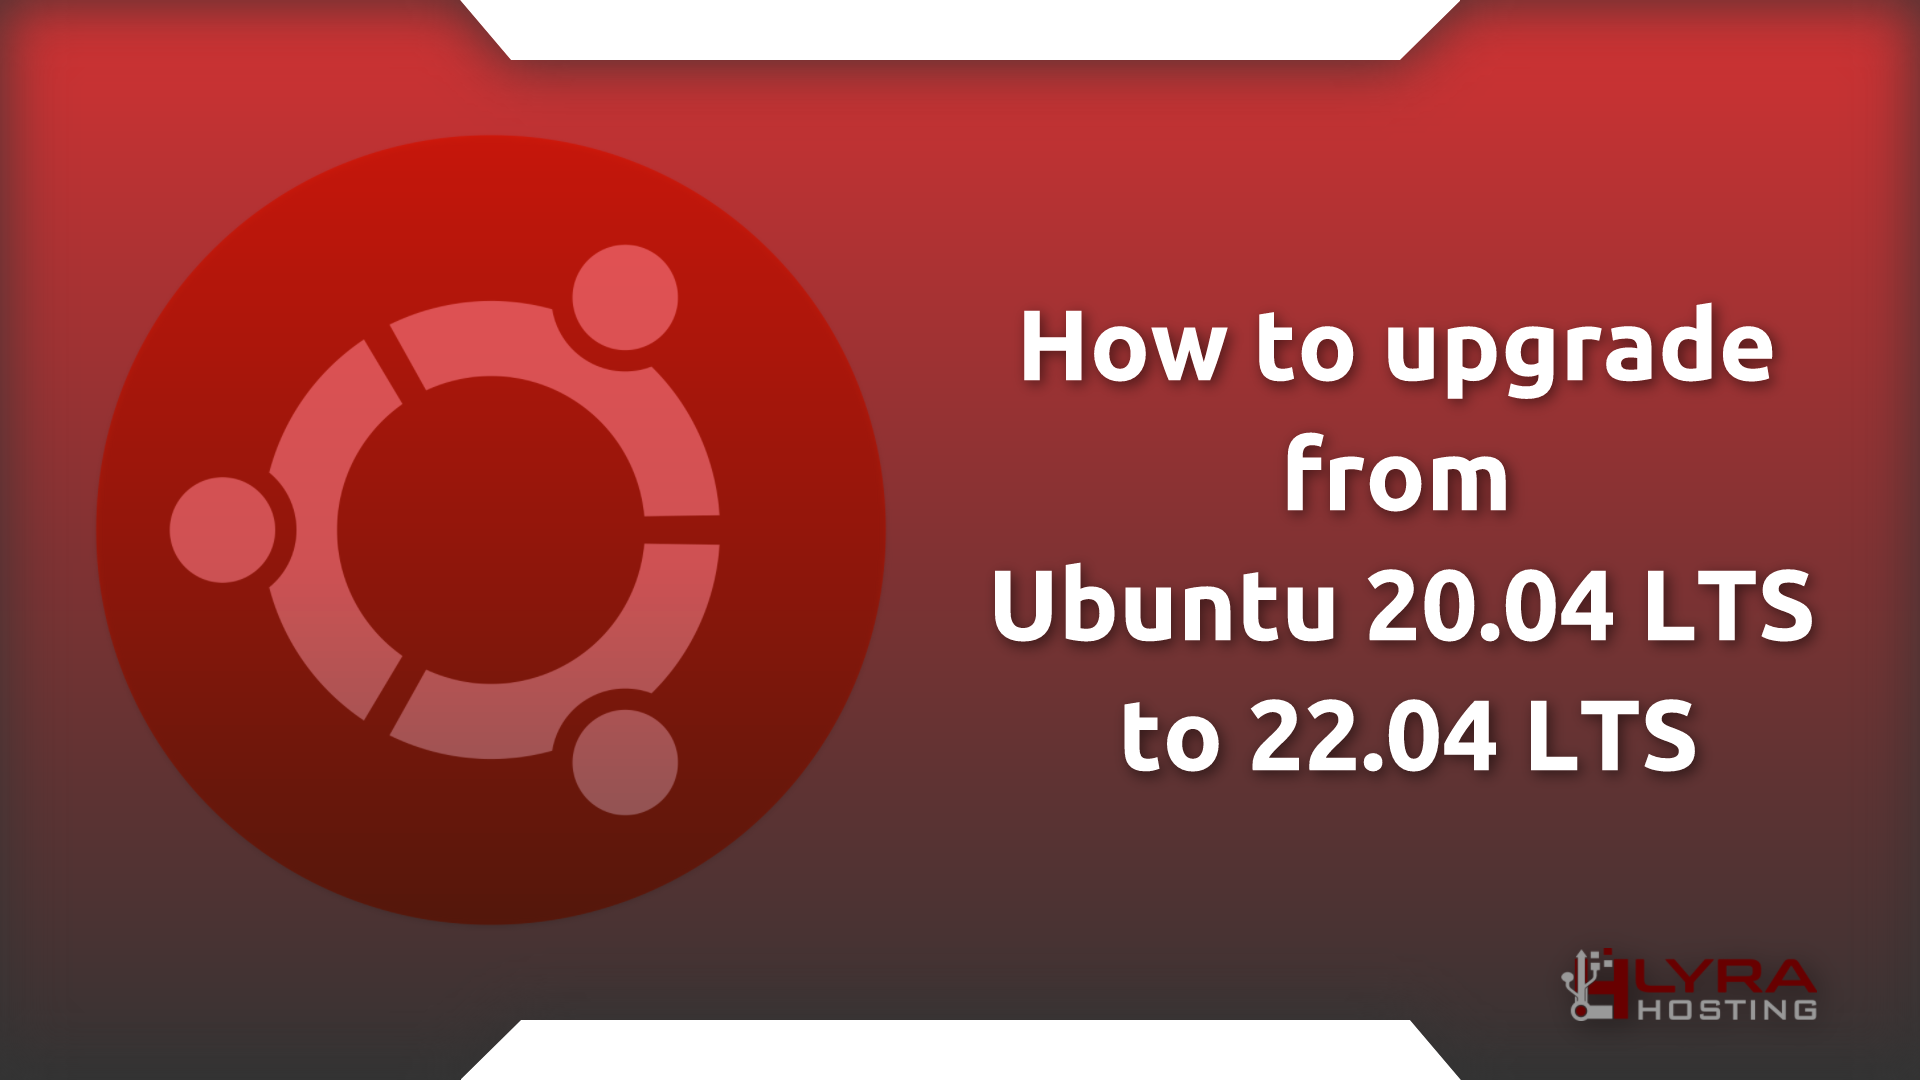 How to upgrade from Ubuntu 20.04 LTS to 22.04 LTS